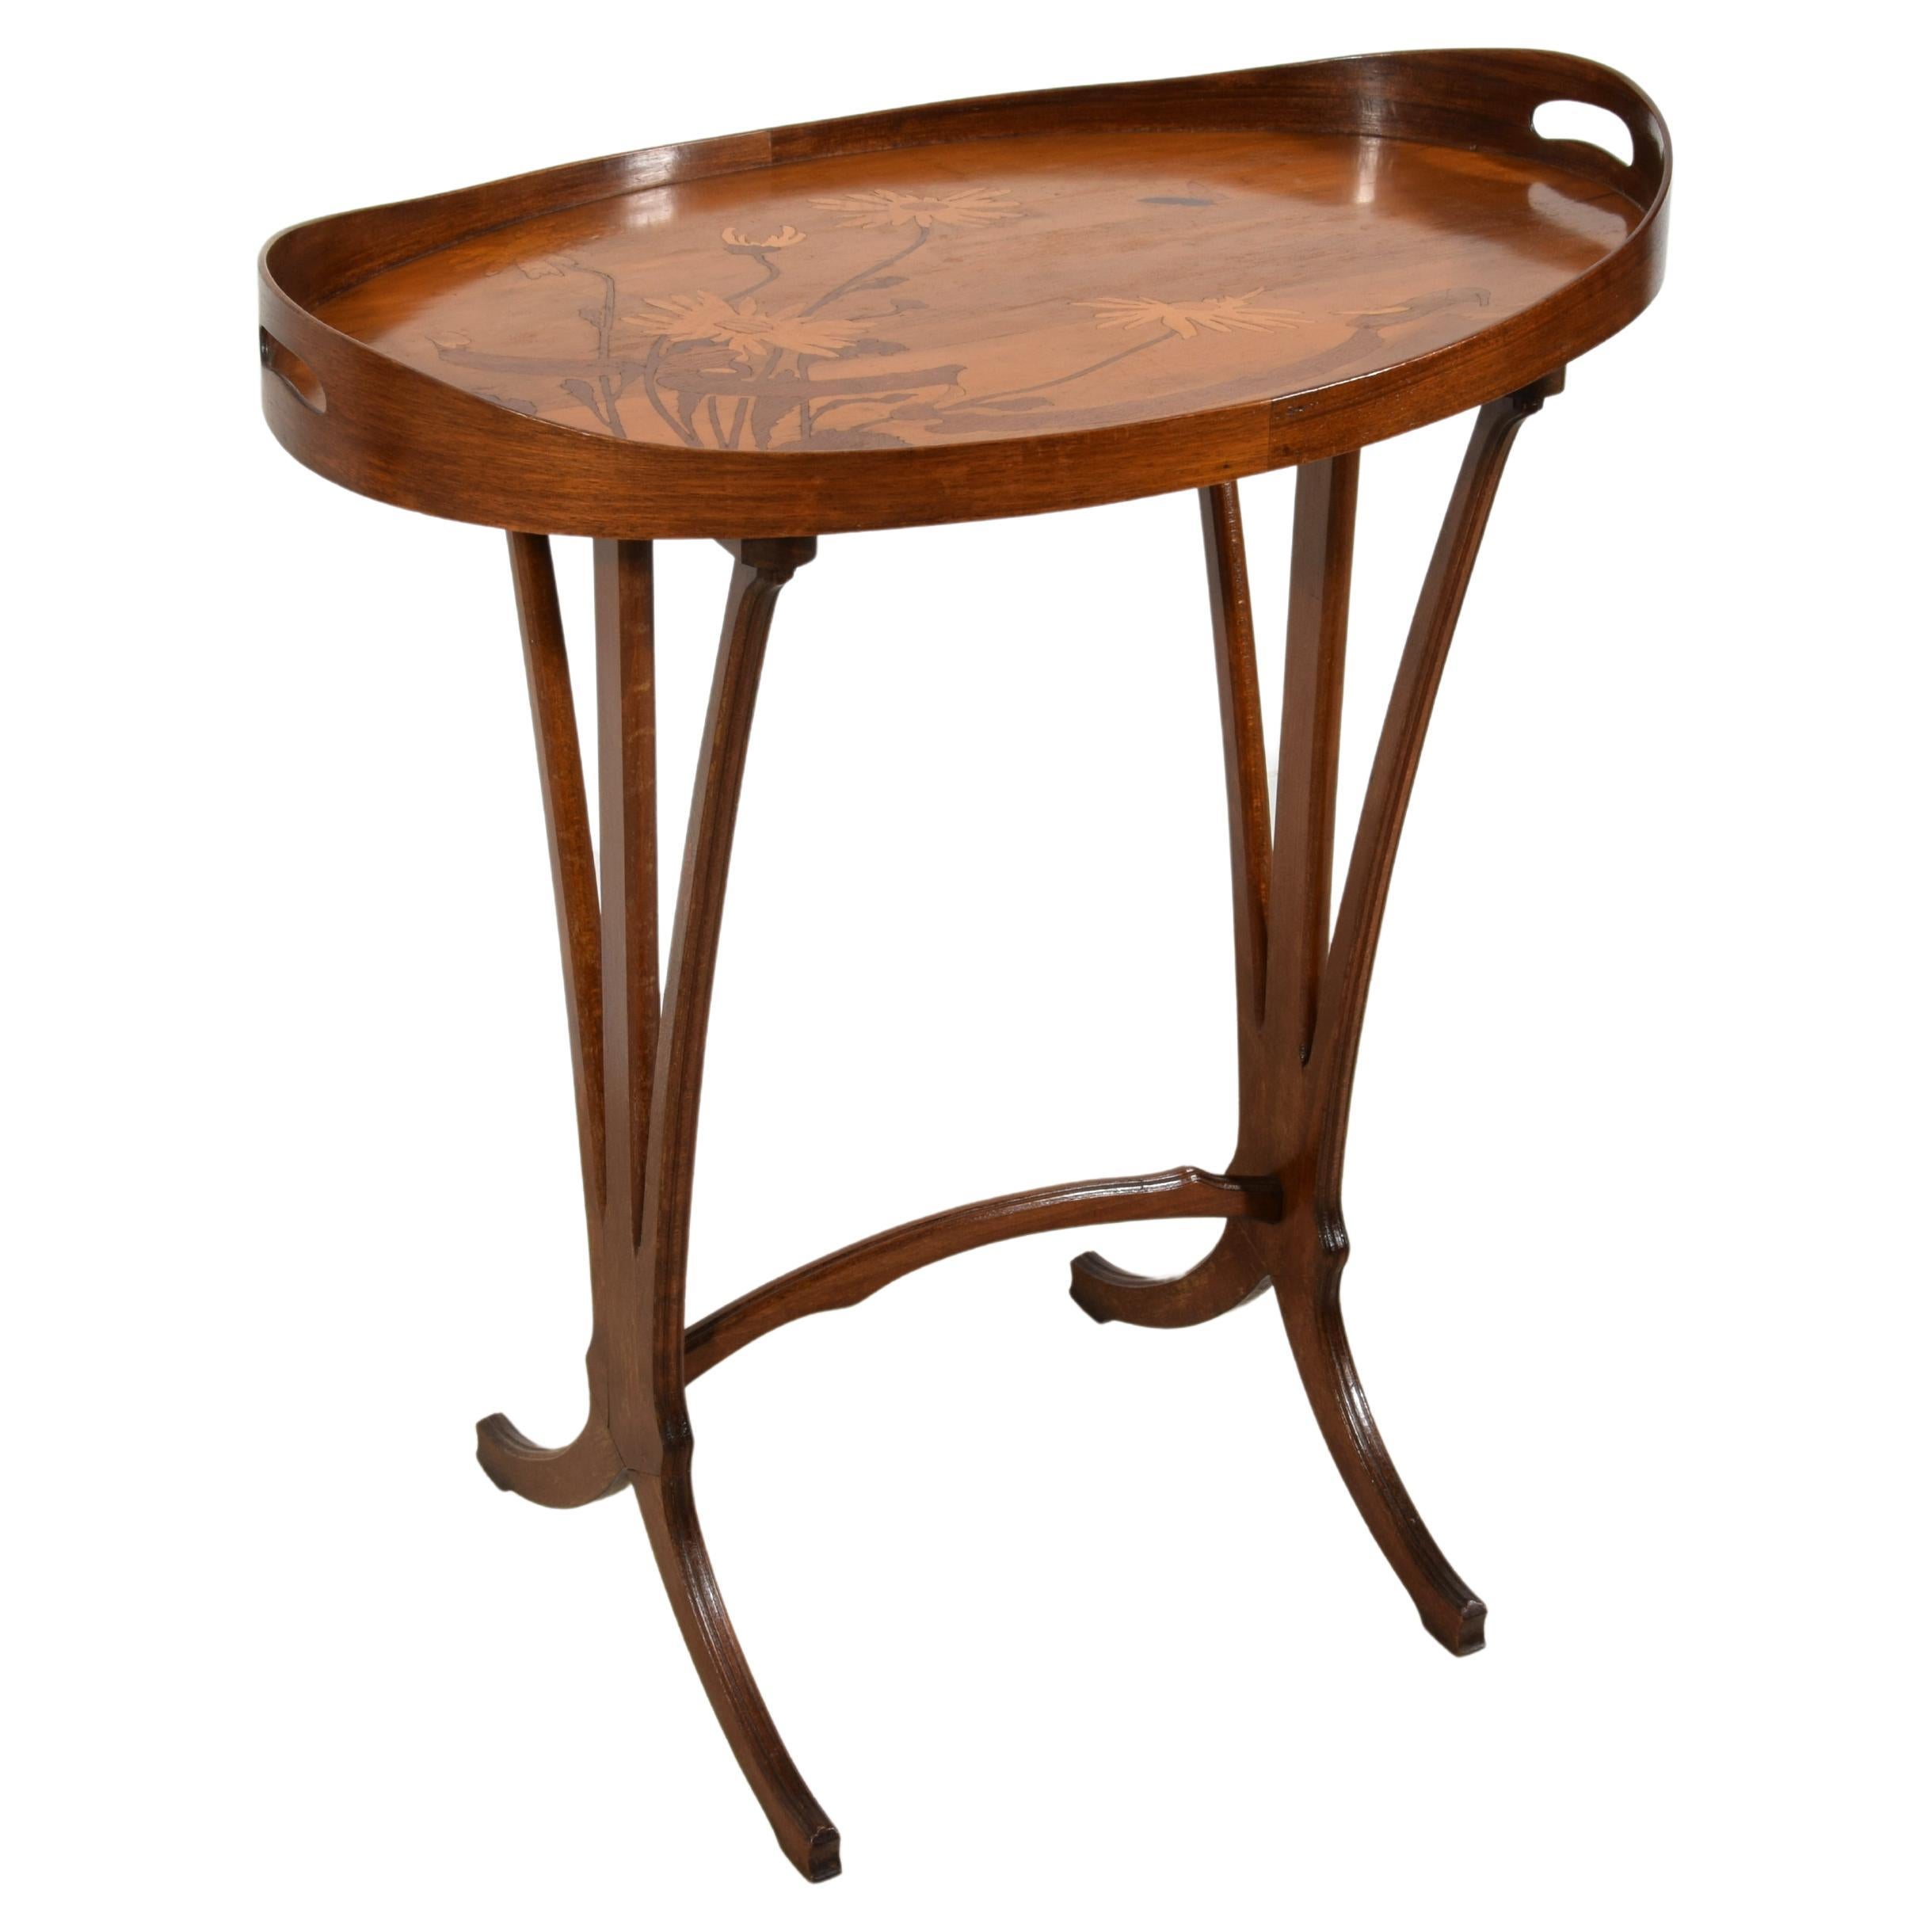 French Inlay Wood Coffee Table by Emile Gallé (1846-1904) For Sale